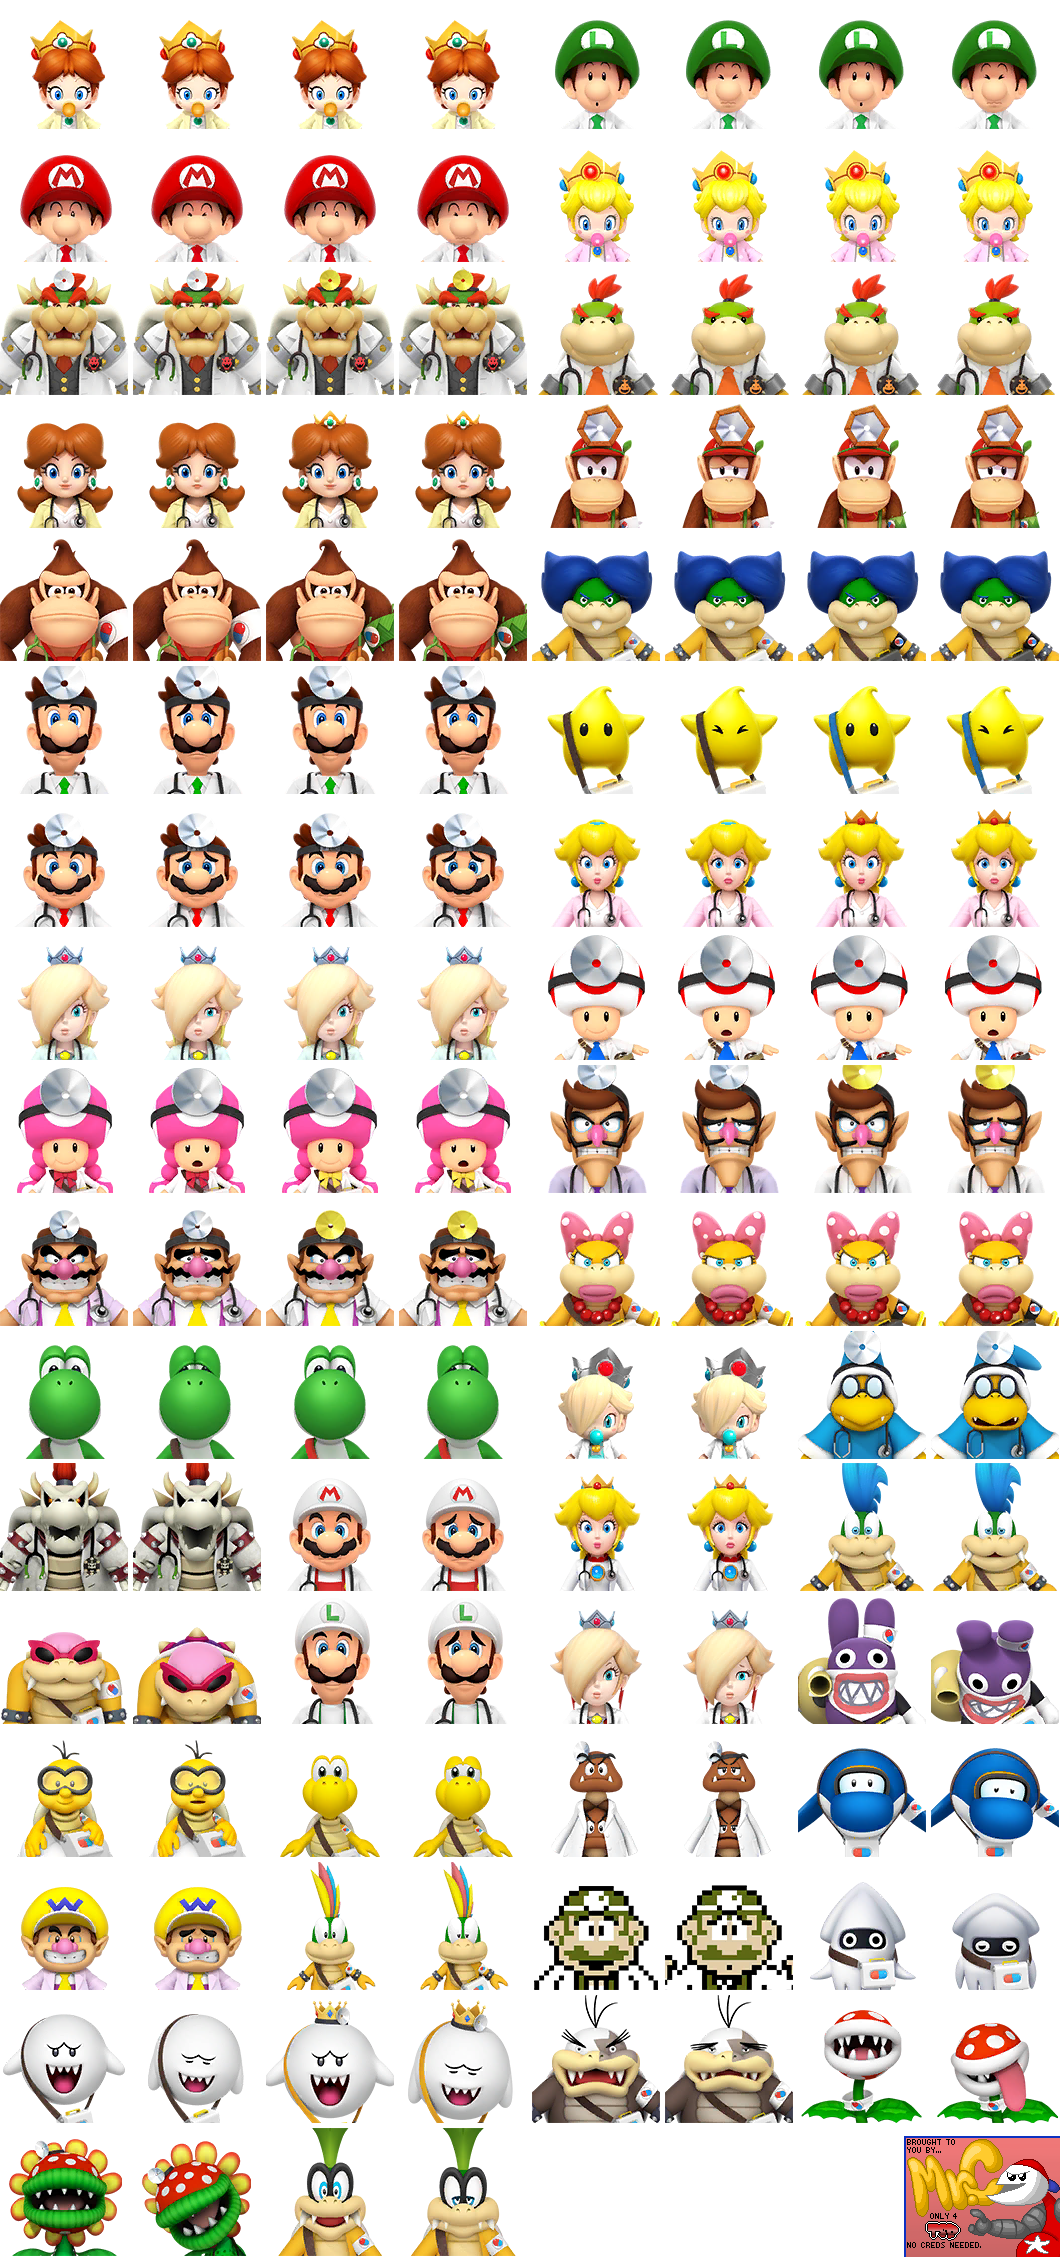 Dr. Mario World - Doctor Profile Icons